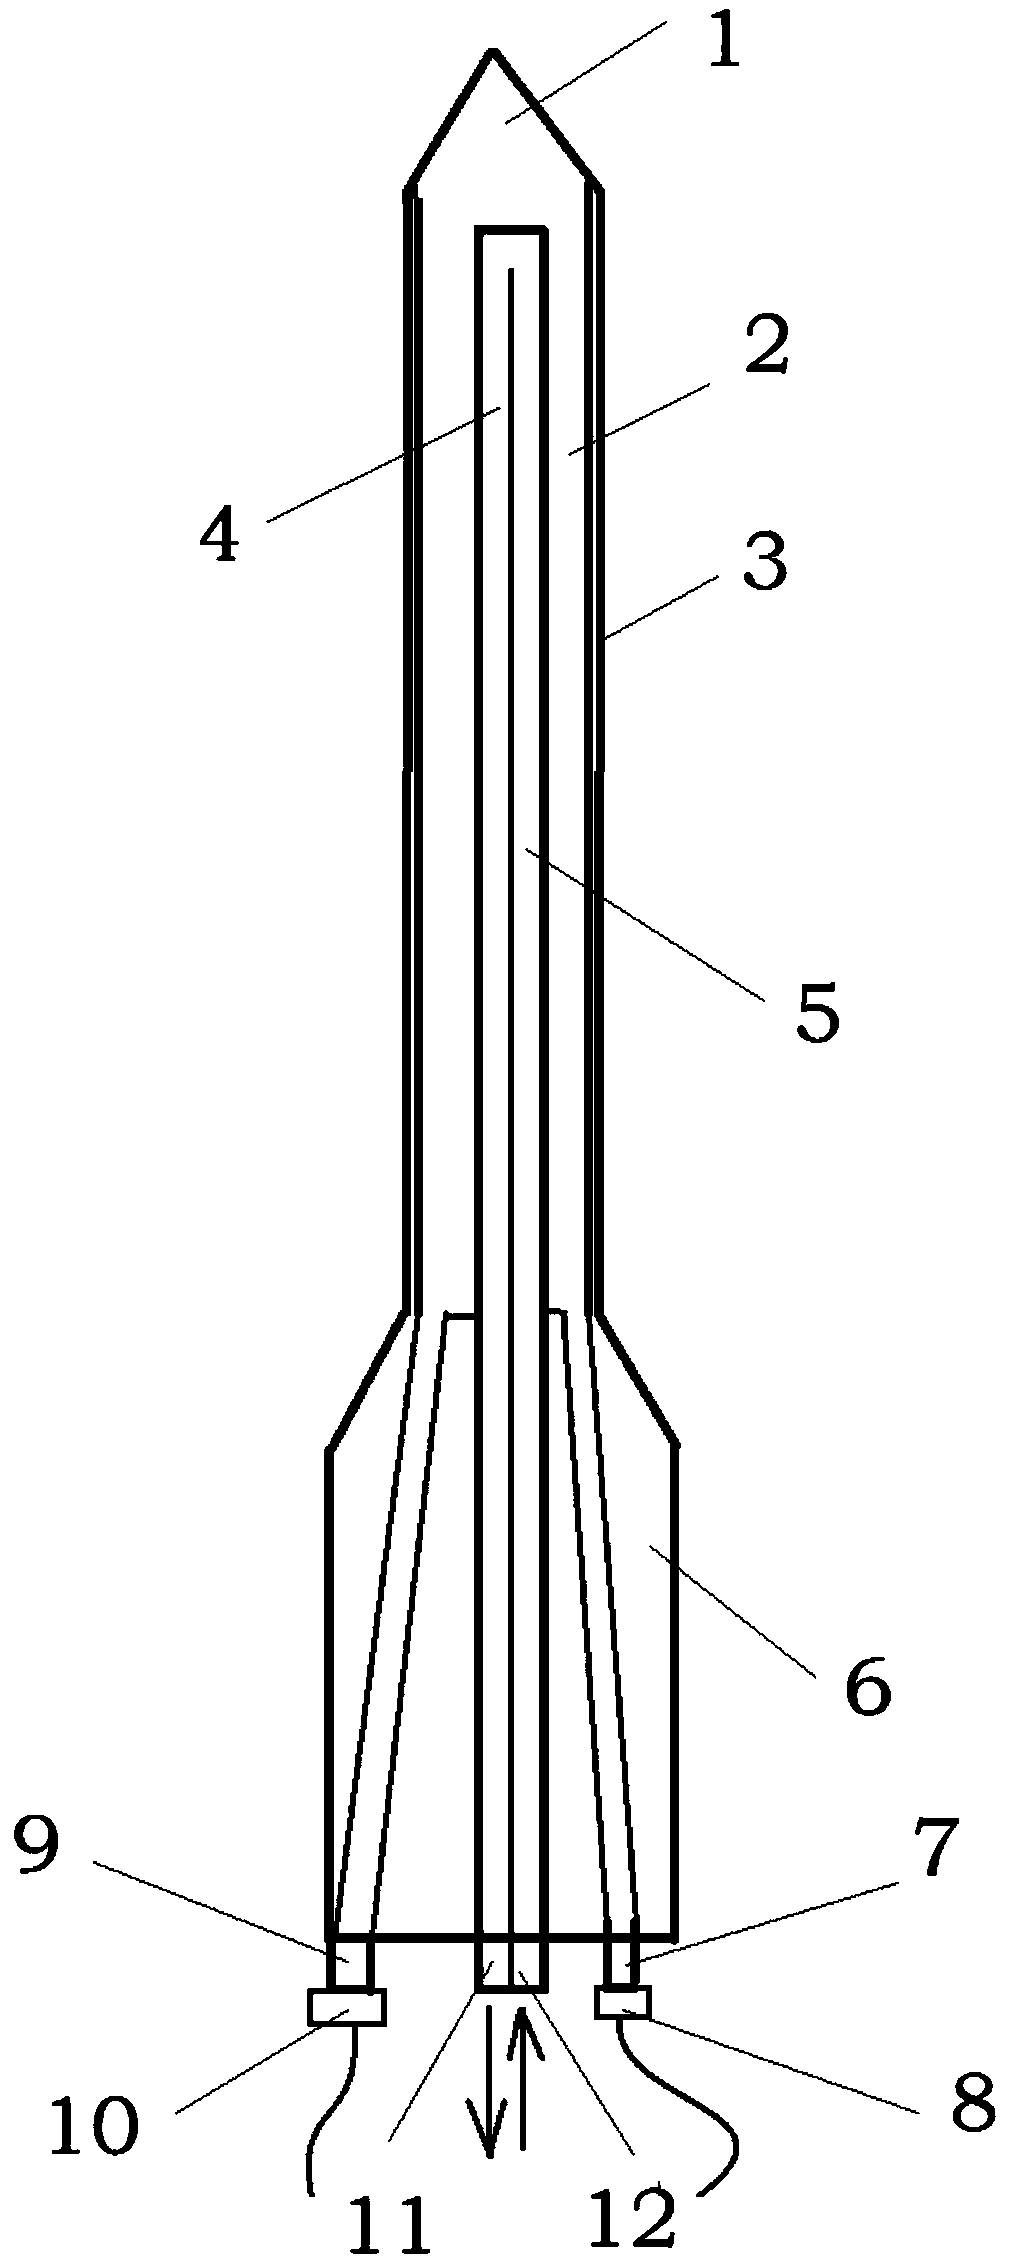 Ablation needle and monitoring system for monitoring recurrent laryngeal nerves